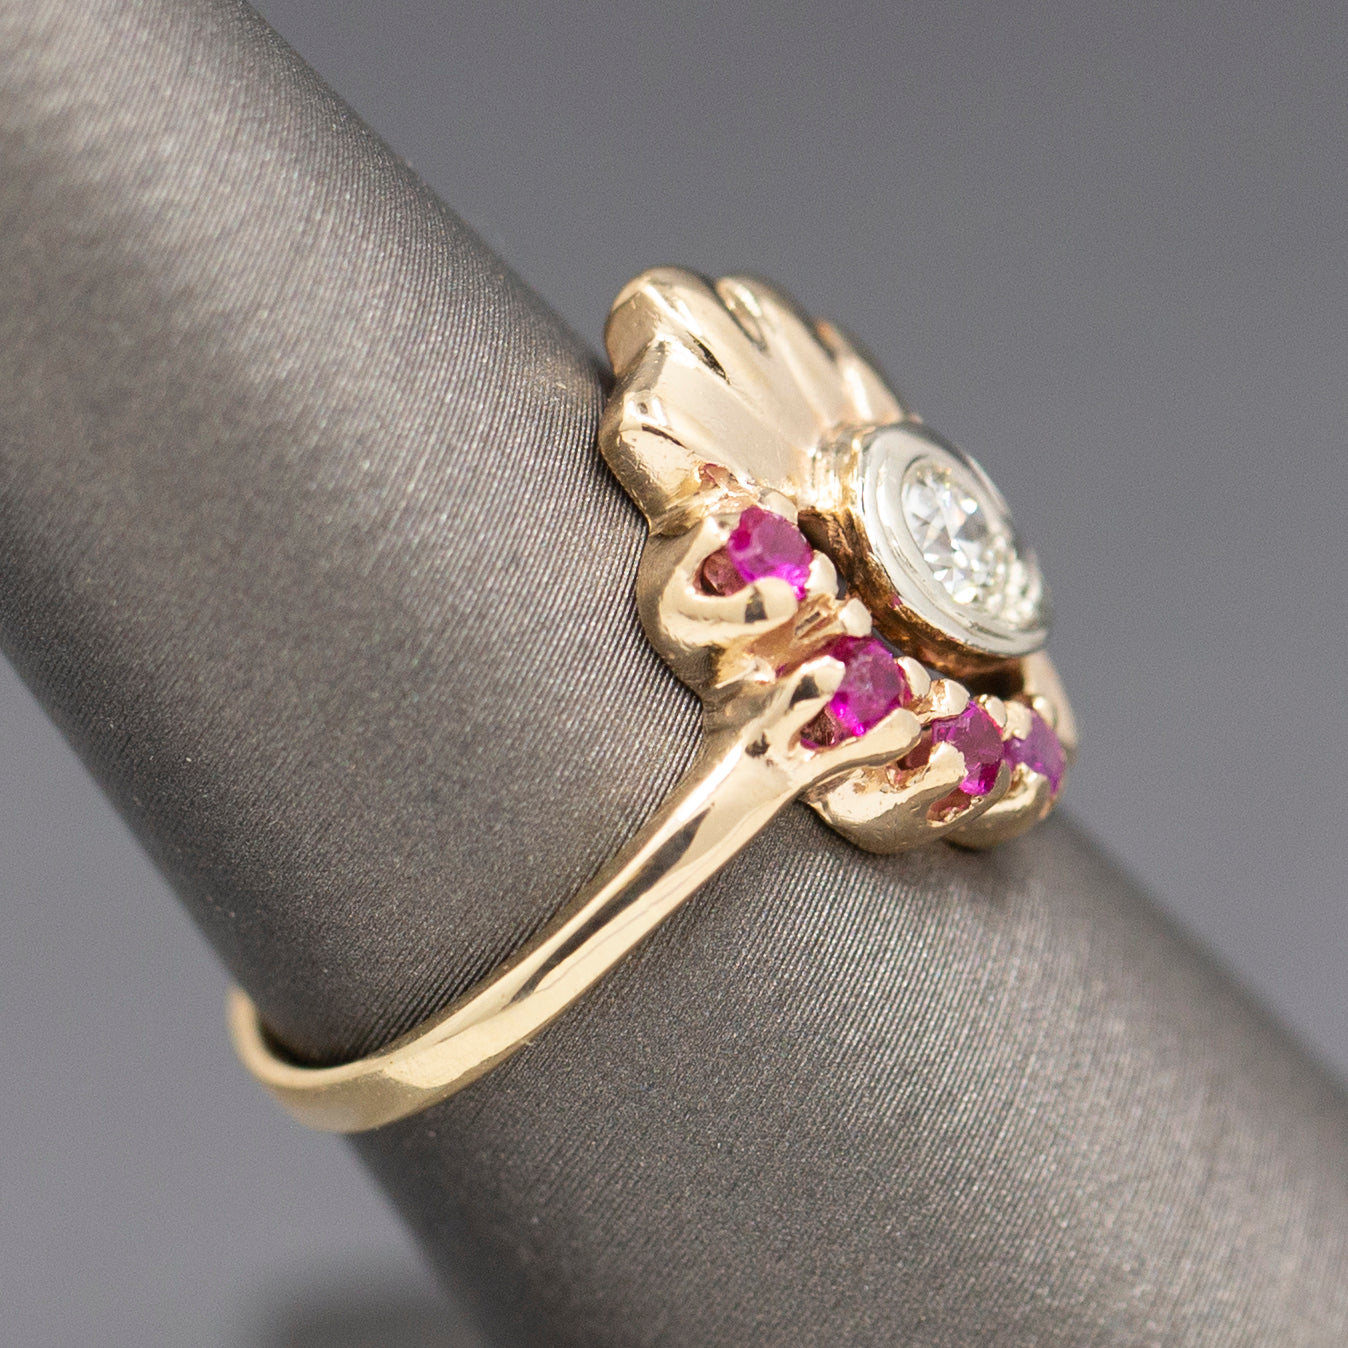 Vintage Retro Ruby and Old European Cut Diamond Ring in 14k Rose Gold